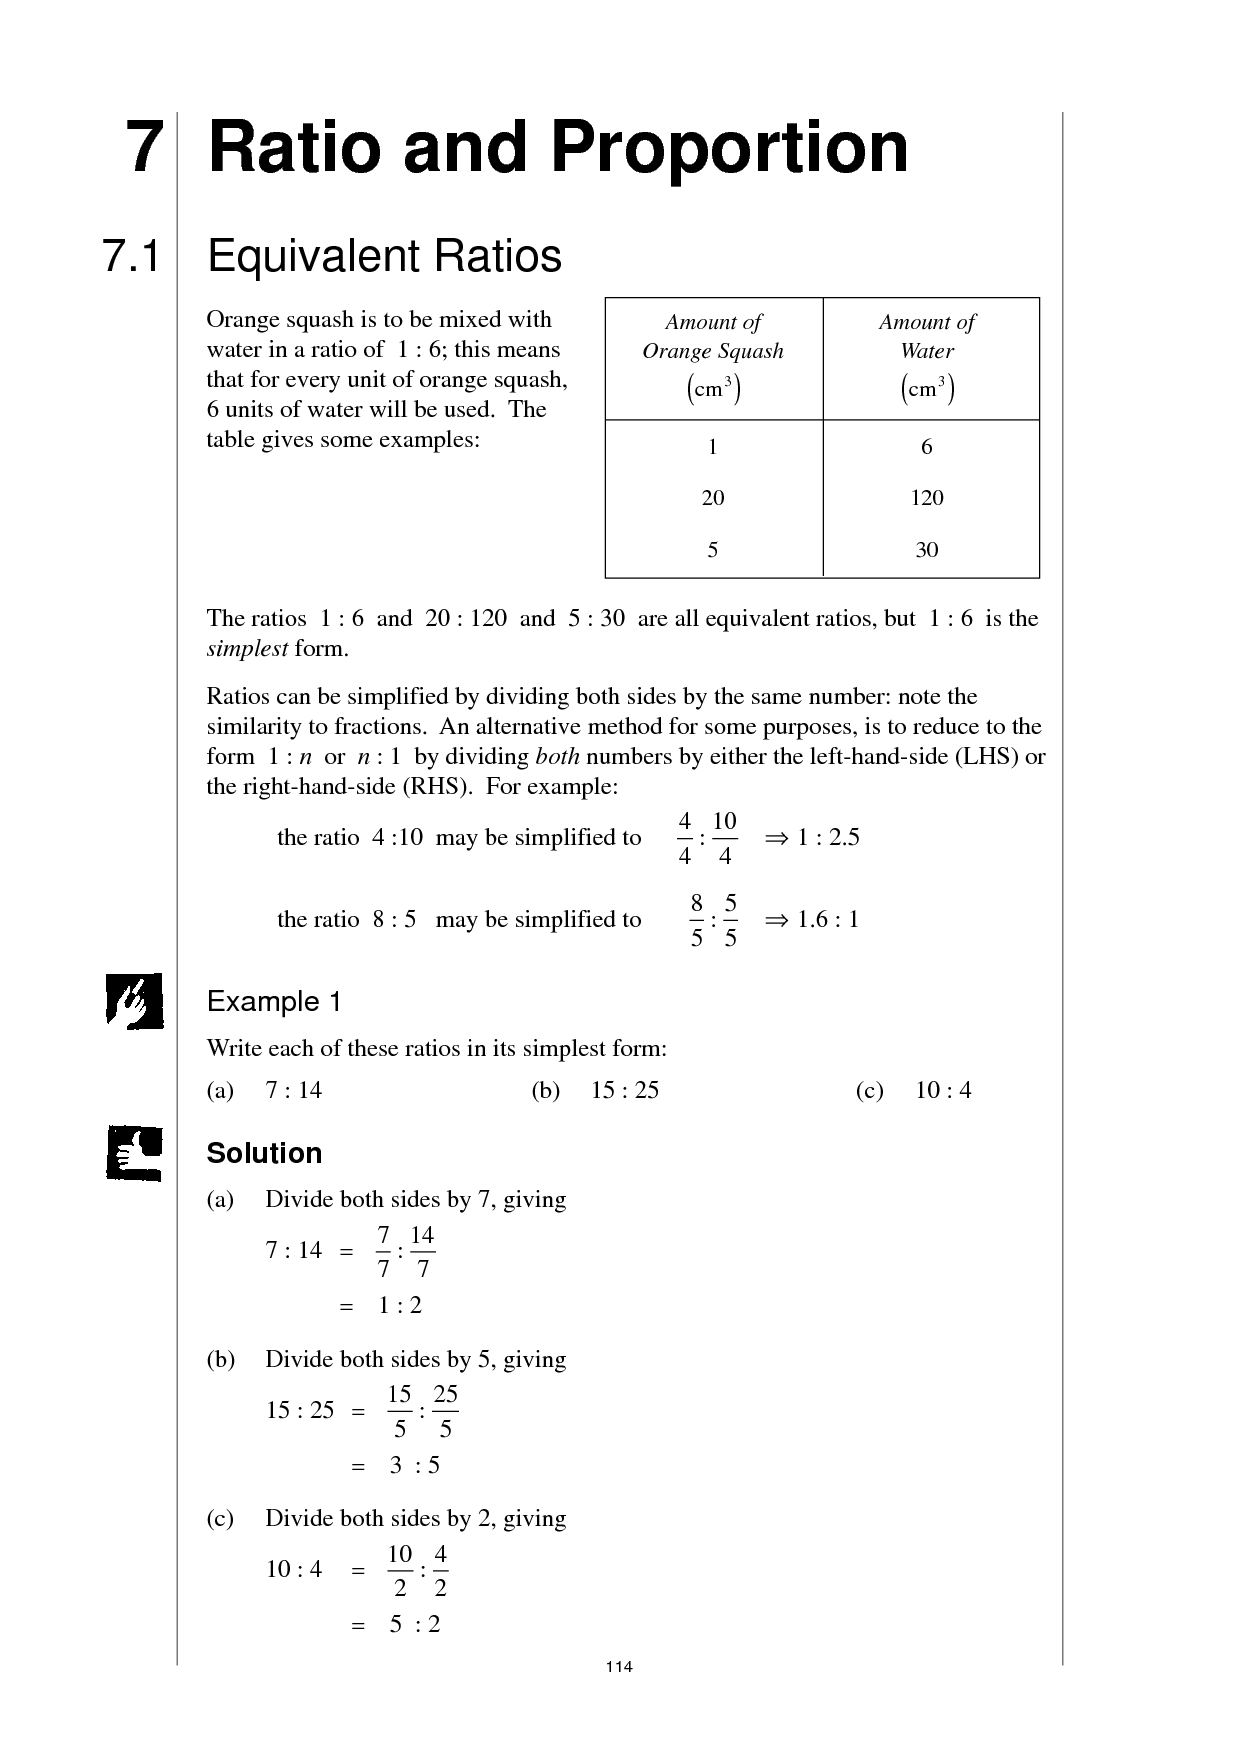 ratios-and-proportions-worksheet-7-1-answers-world-6-ratios-rates-and